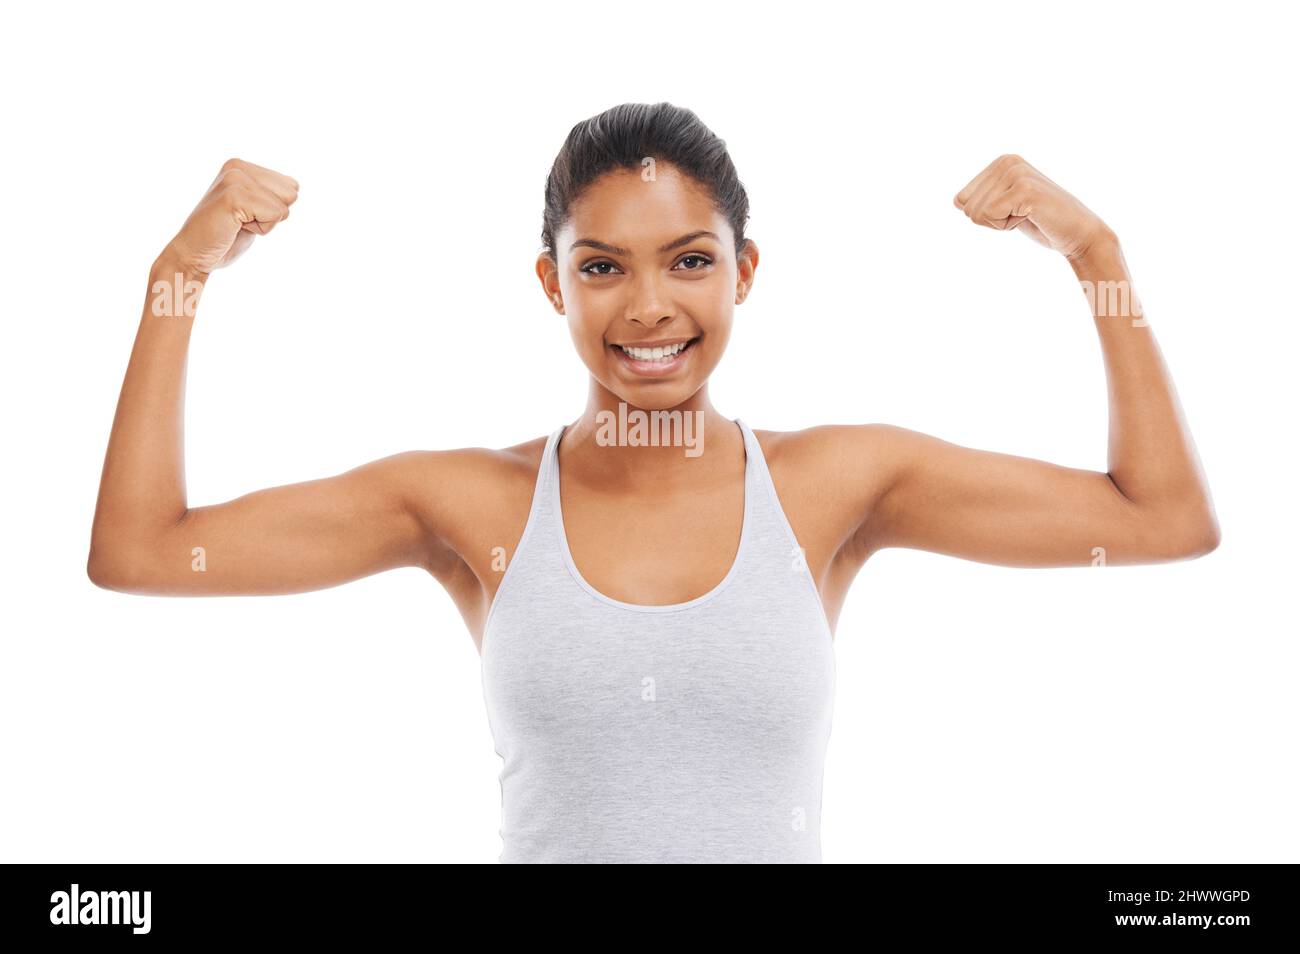 https://c8.alamy.com/comp/2HWWGPD/showing-off-her-muscles-a-young-woman-in-gym-clothes-flexing-her-arms-2HWWGPD.jpg